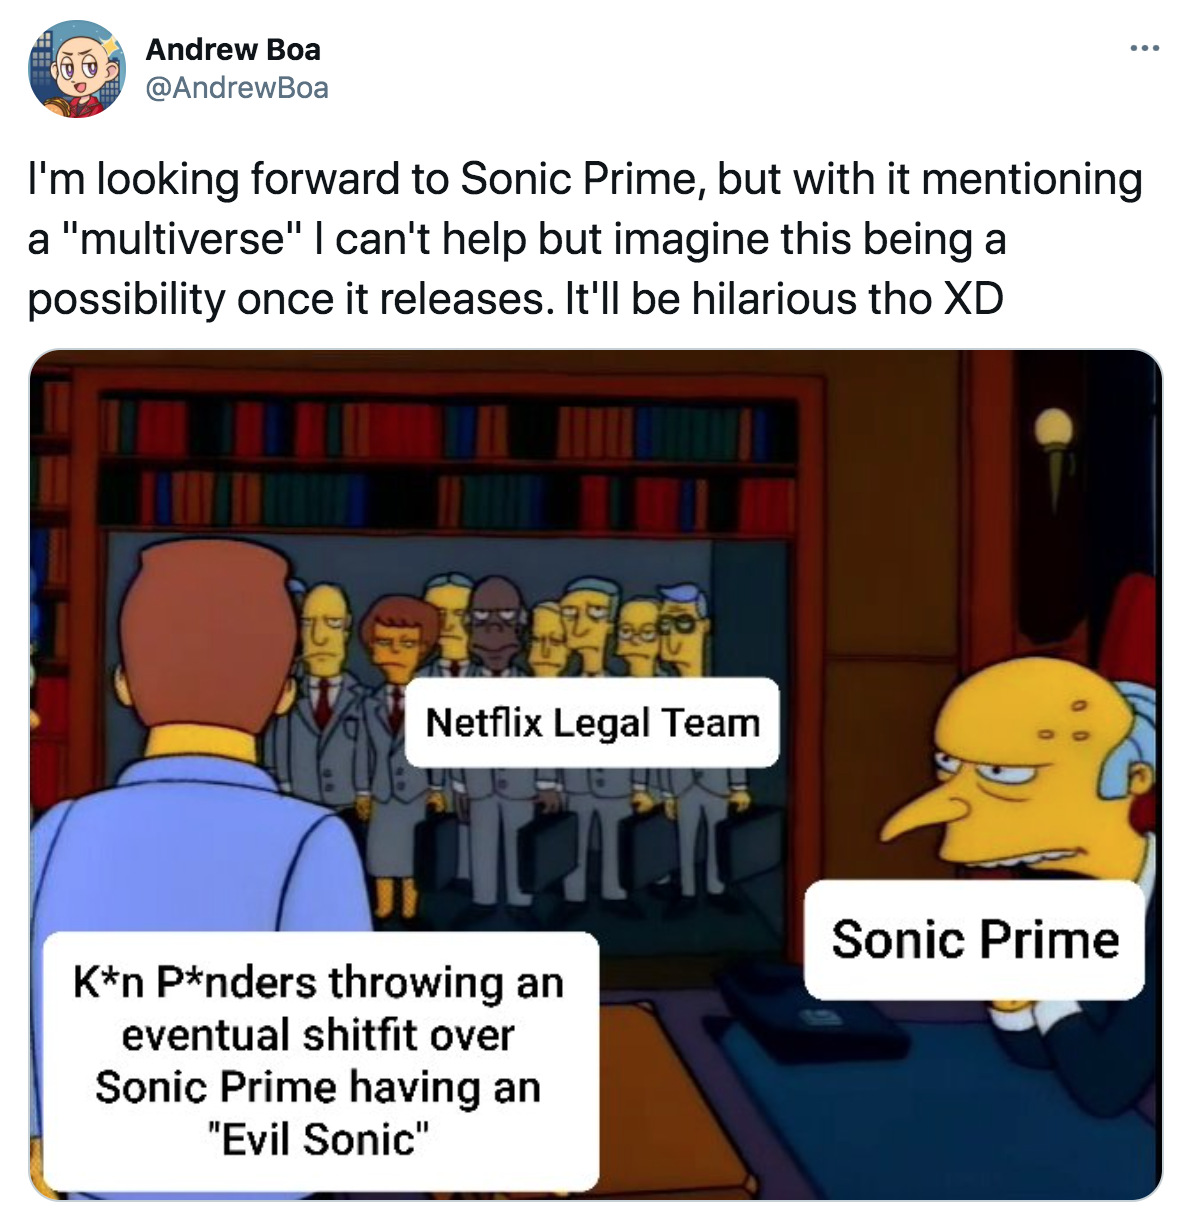 Sonic Prime Netflix - Andrew Boa I'm looking forward to Sonic Prime, but with it mentioning a